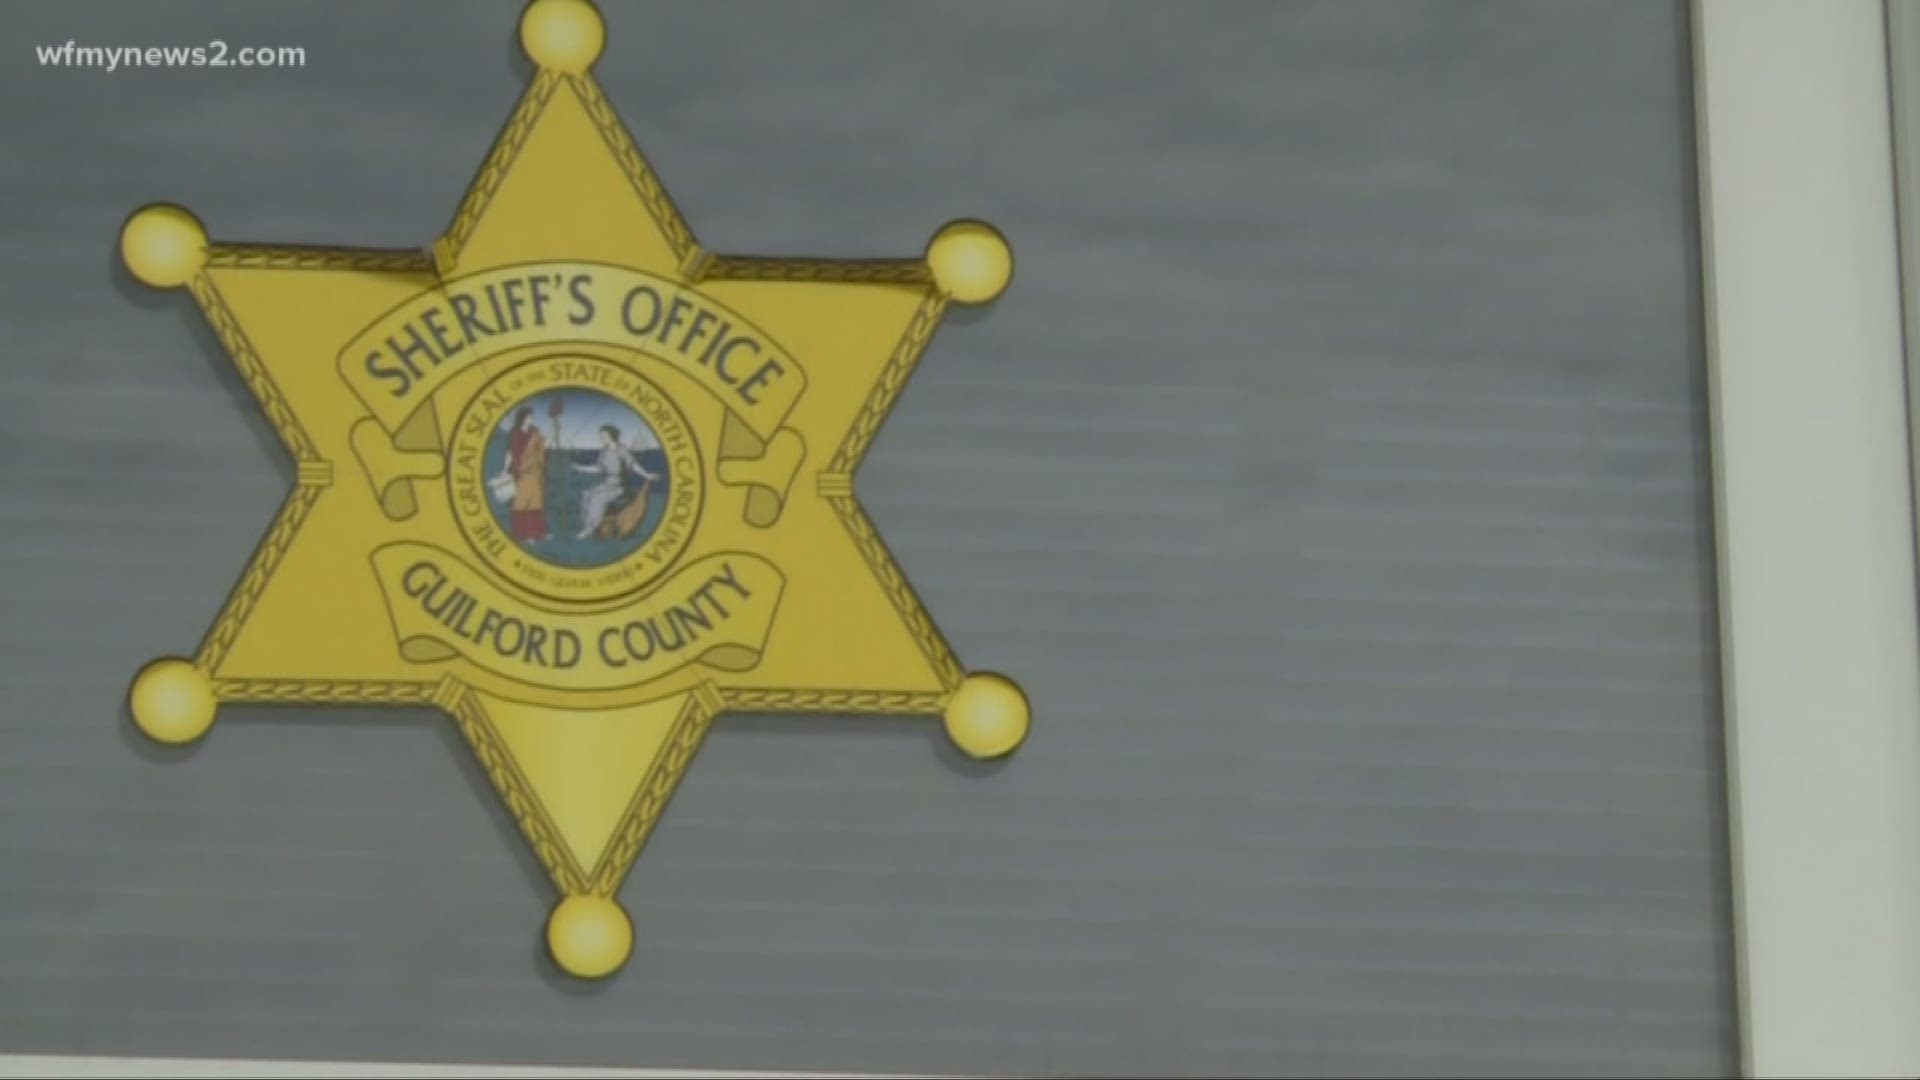 Guilford County Sheriff Danny Rogers told the Summerfield Town Council the reason his team had a difficult transition is because "papers were destroyed, computers were taken out."